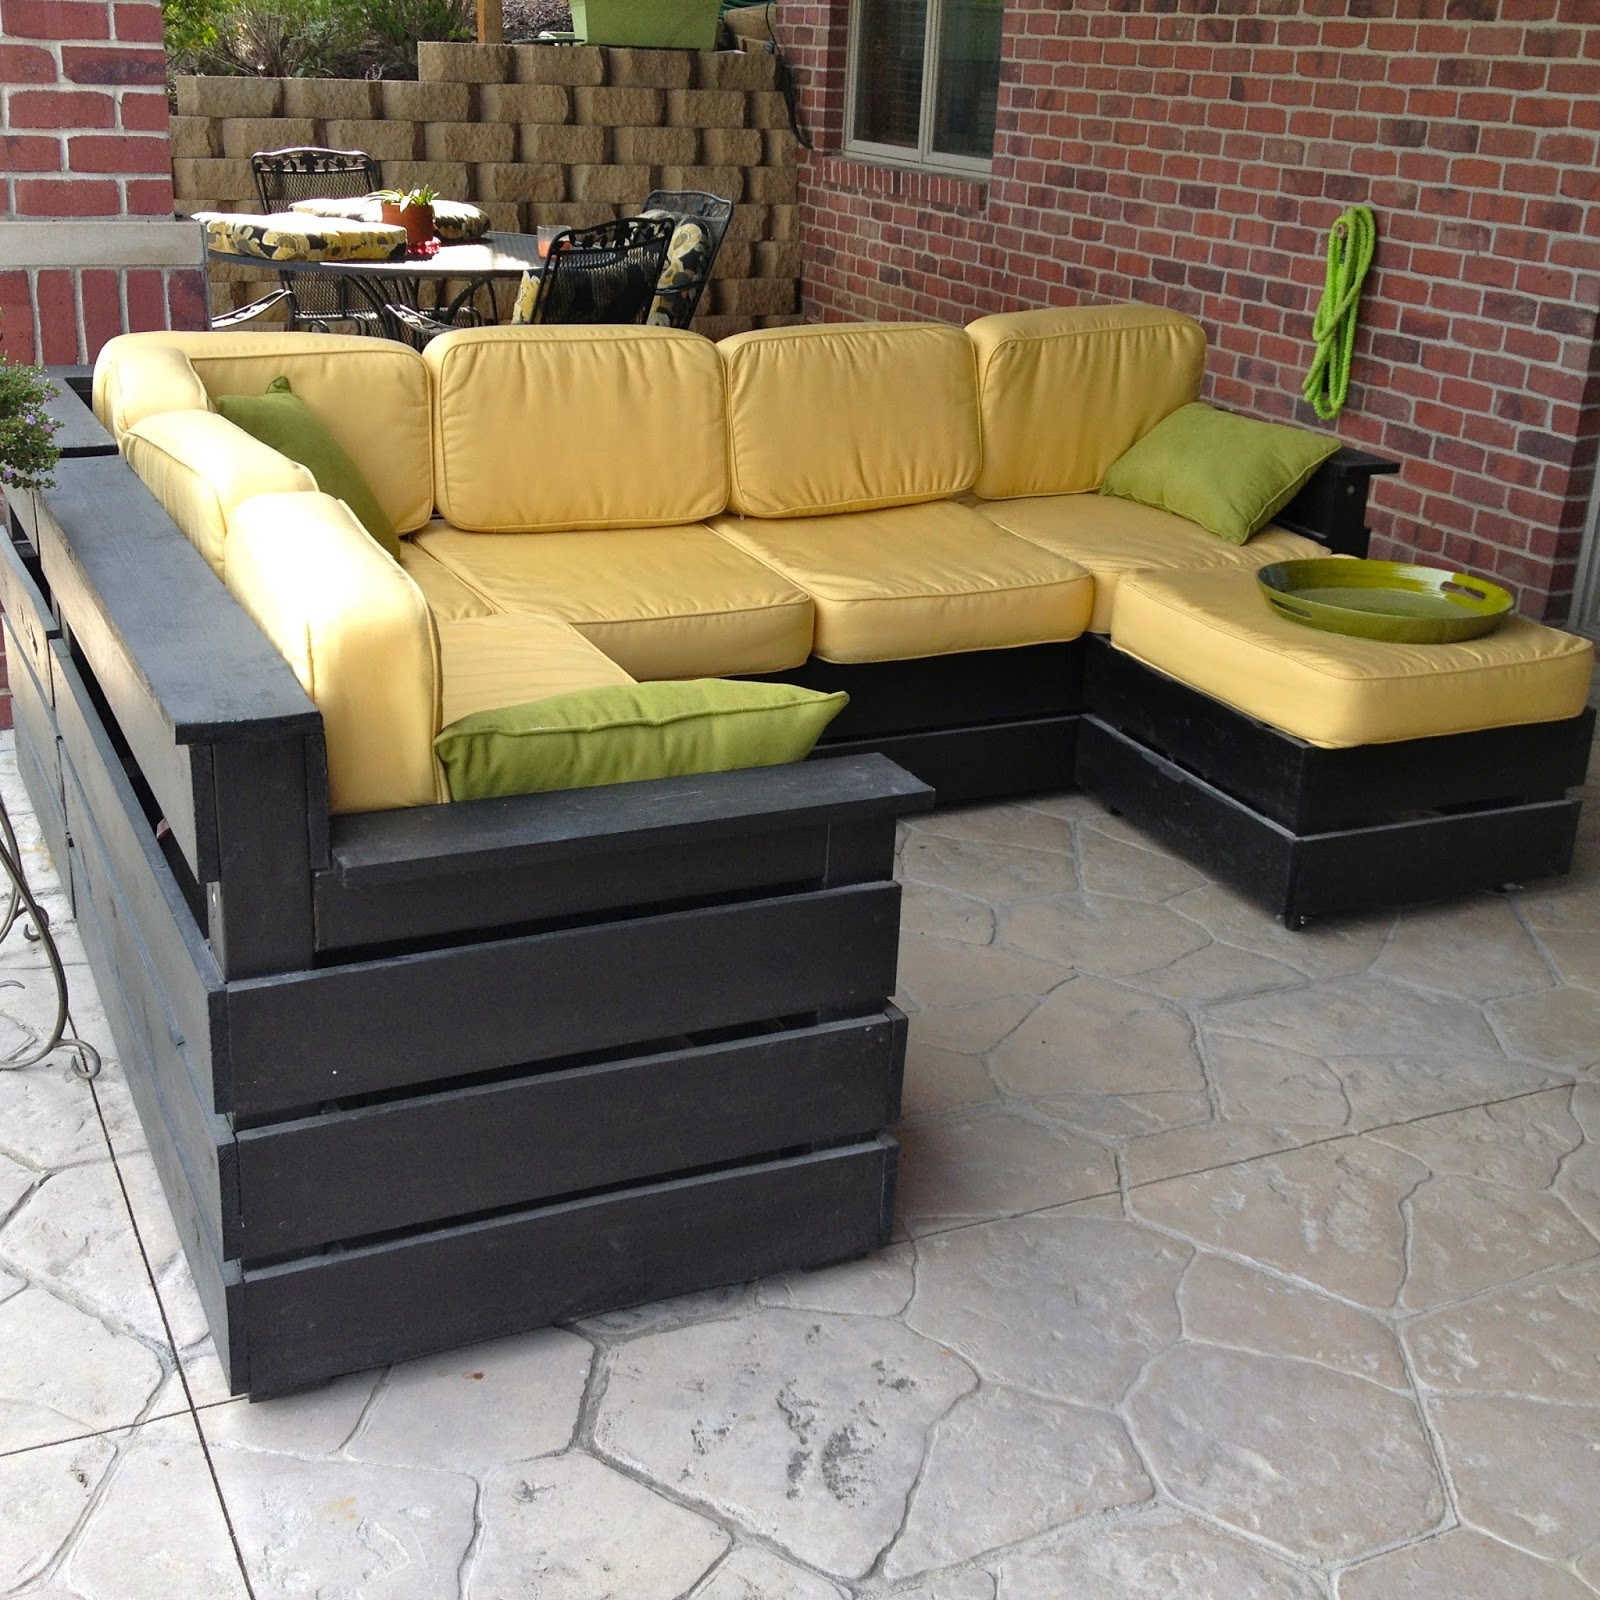 DIY Outdoor Couch
 DIY Why Spend More DIY Outdoor Sectional